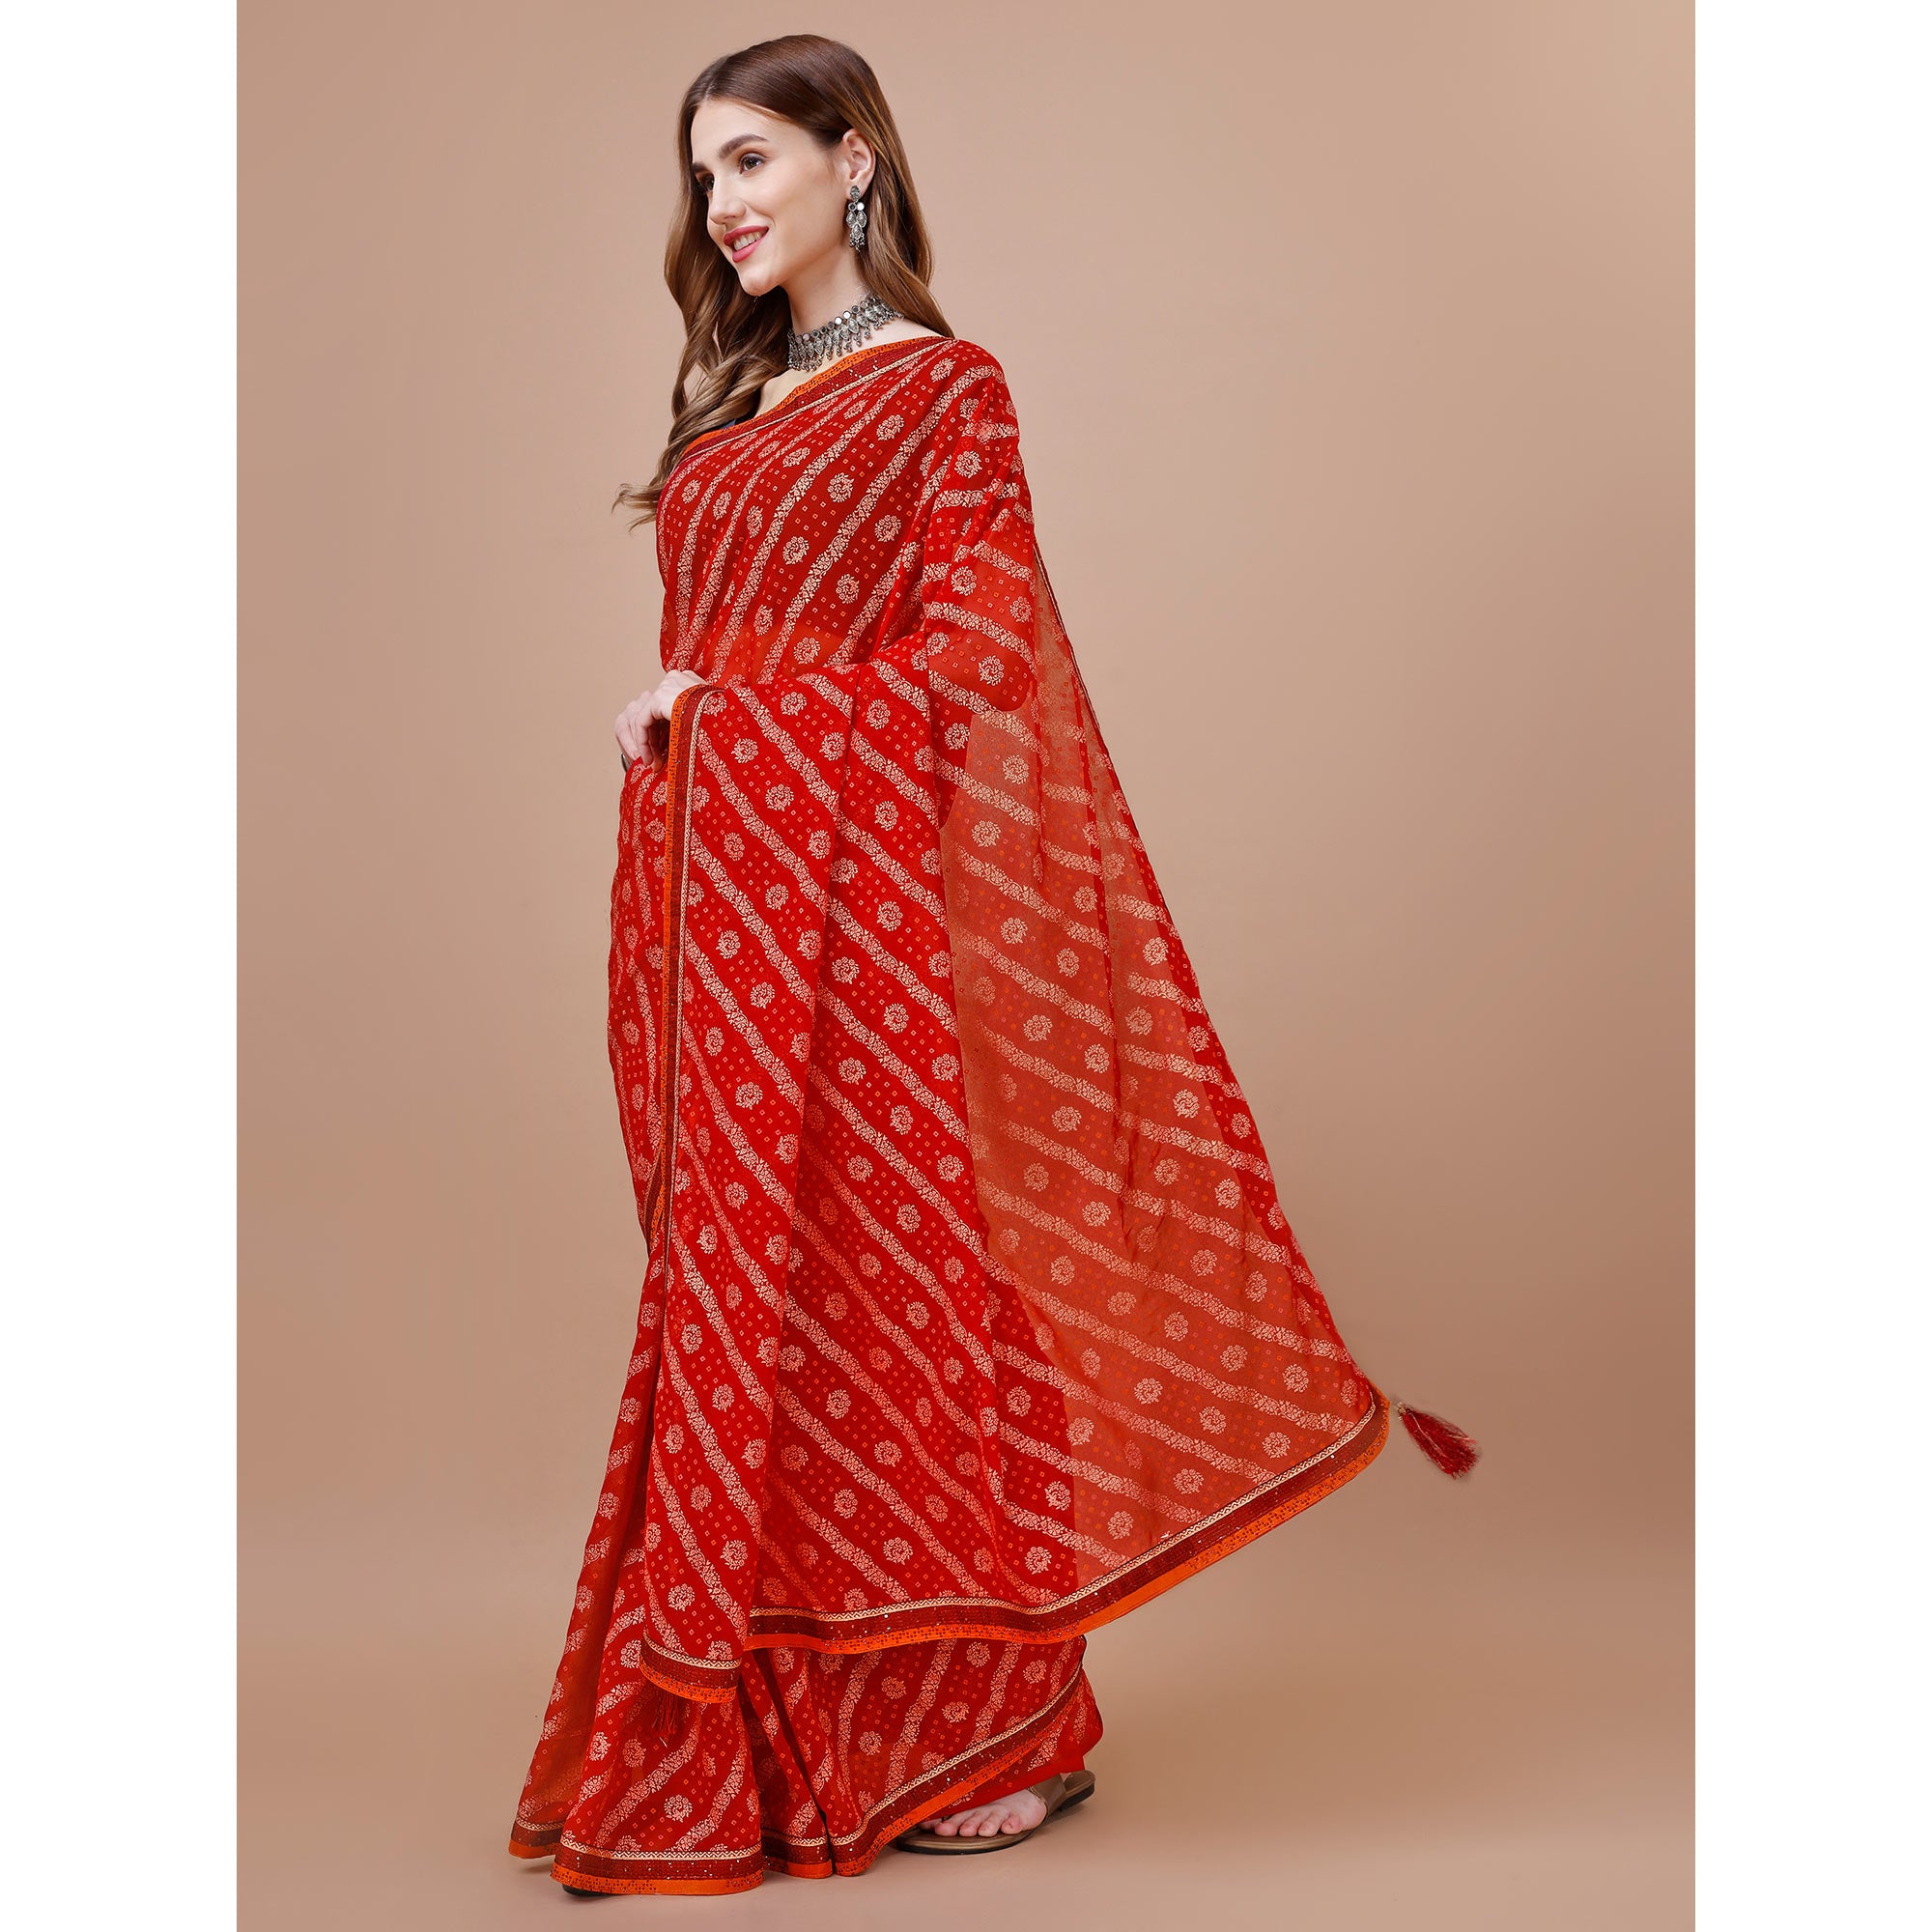 Red Floral Foil Printed Chiffon Saree With Lace Border